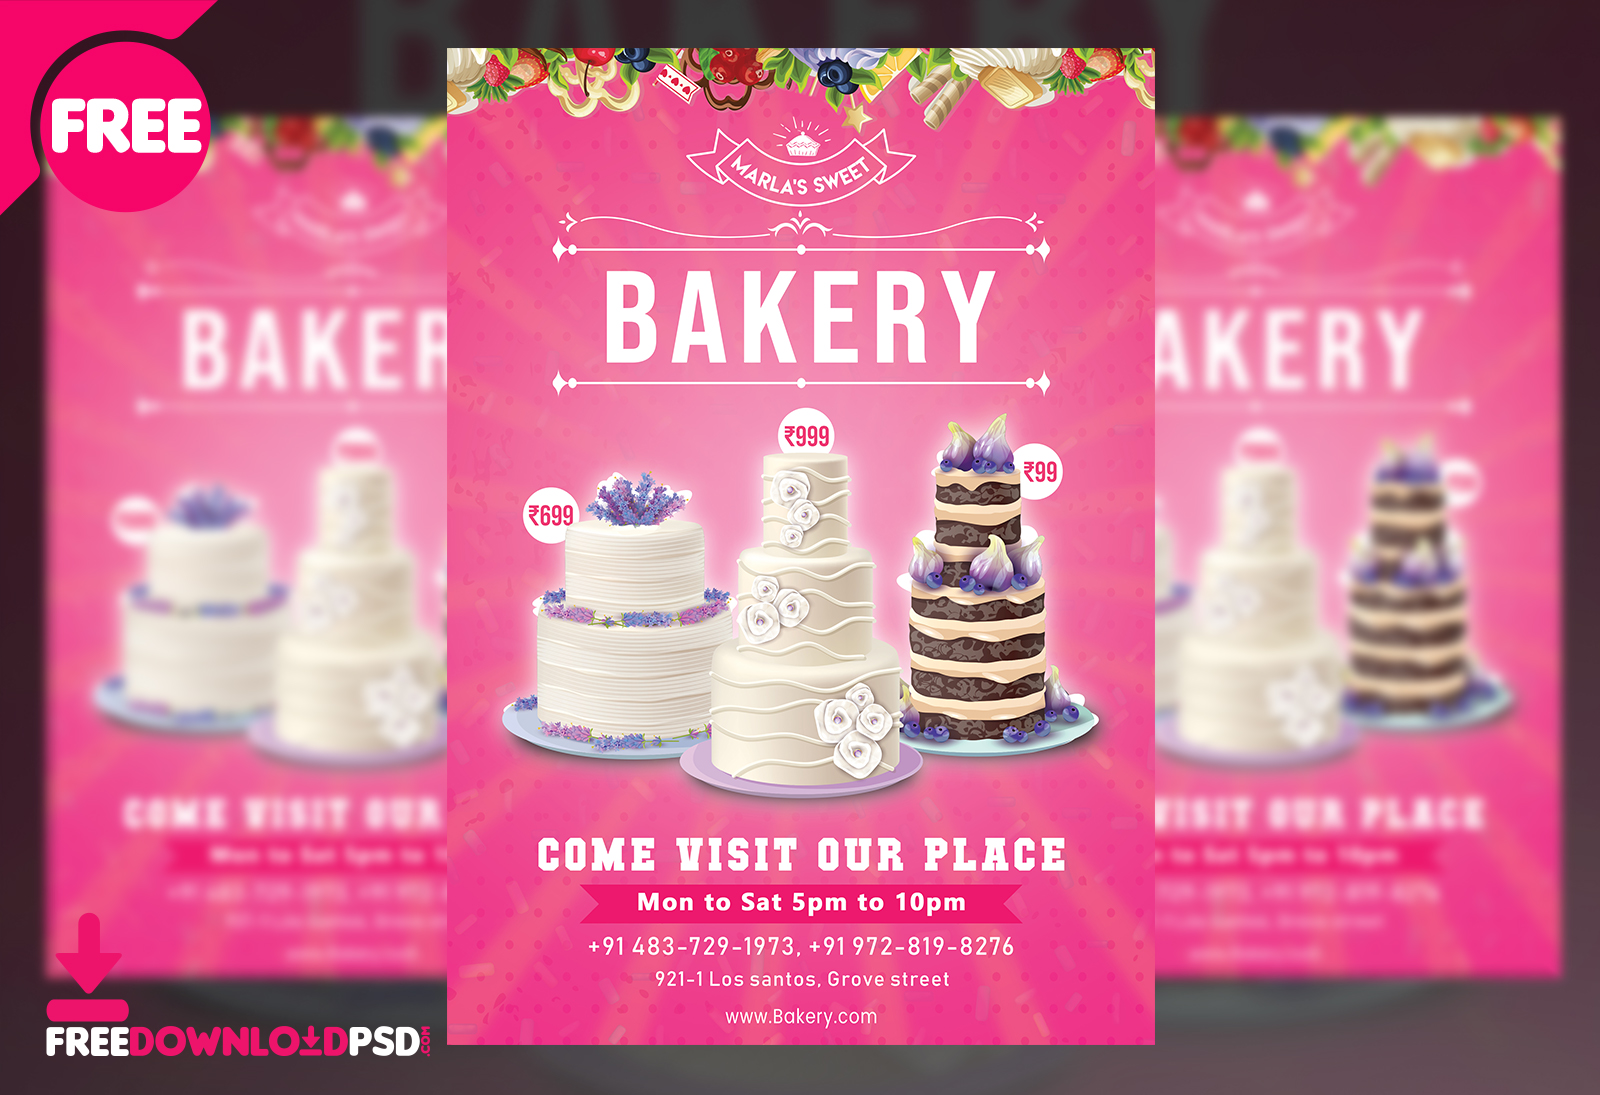 170000+ Cake Posters template download free for graphic design_Lovepik.com